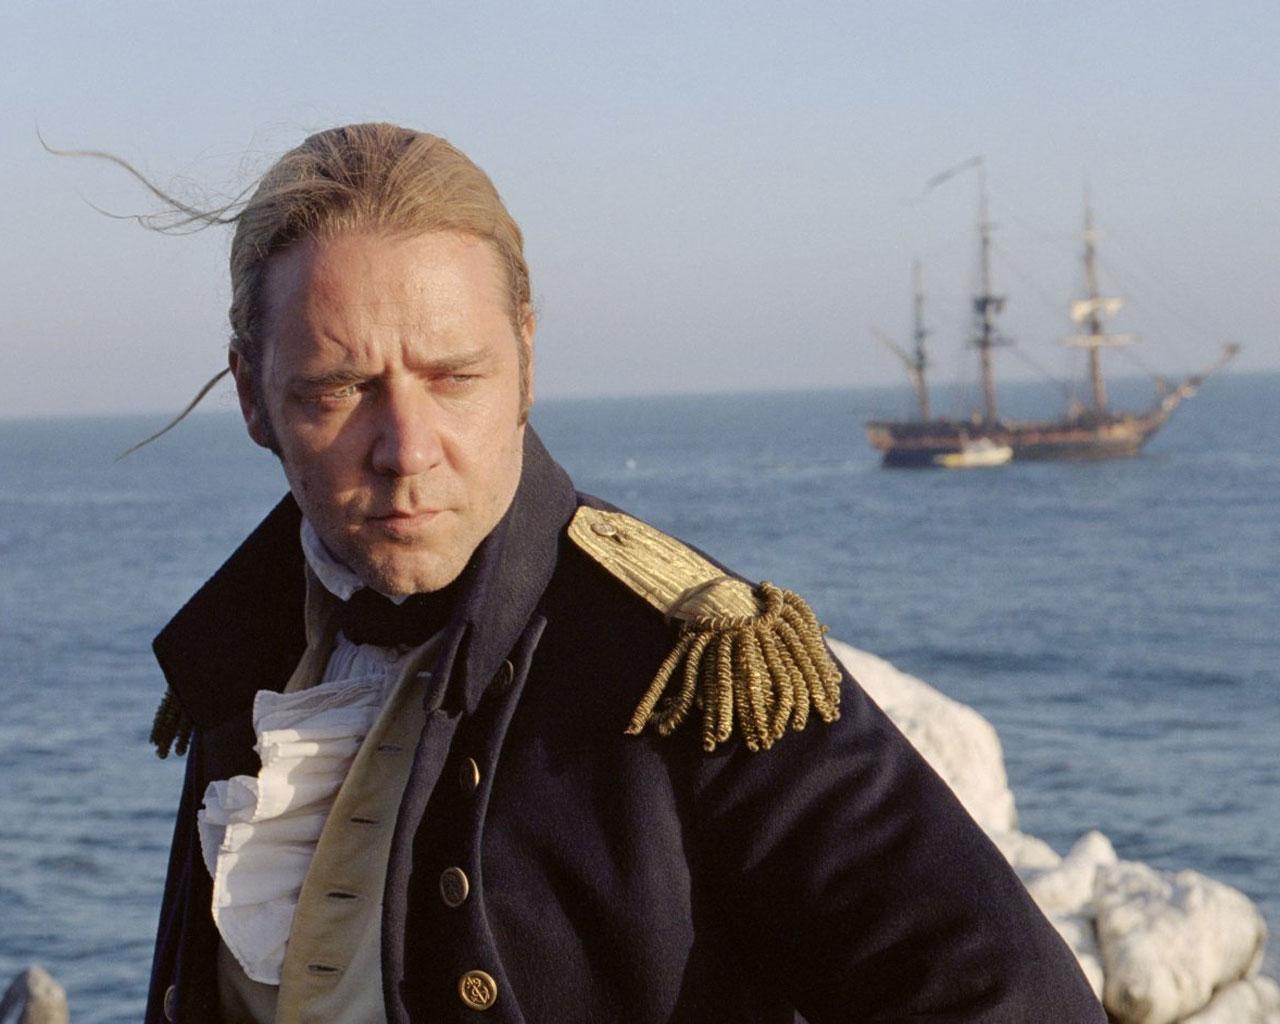 Master And Commander: The Far Side Of The World Wallpaper #2 1280 x 1024 